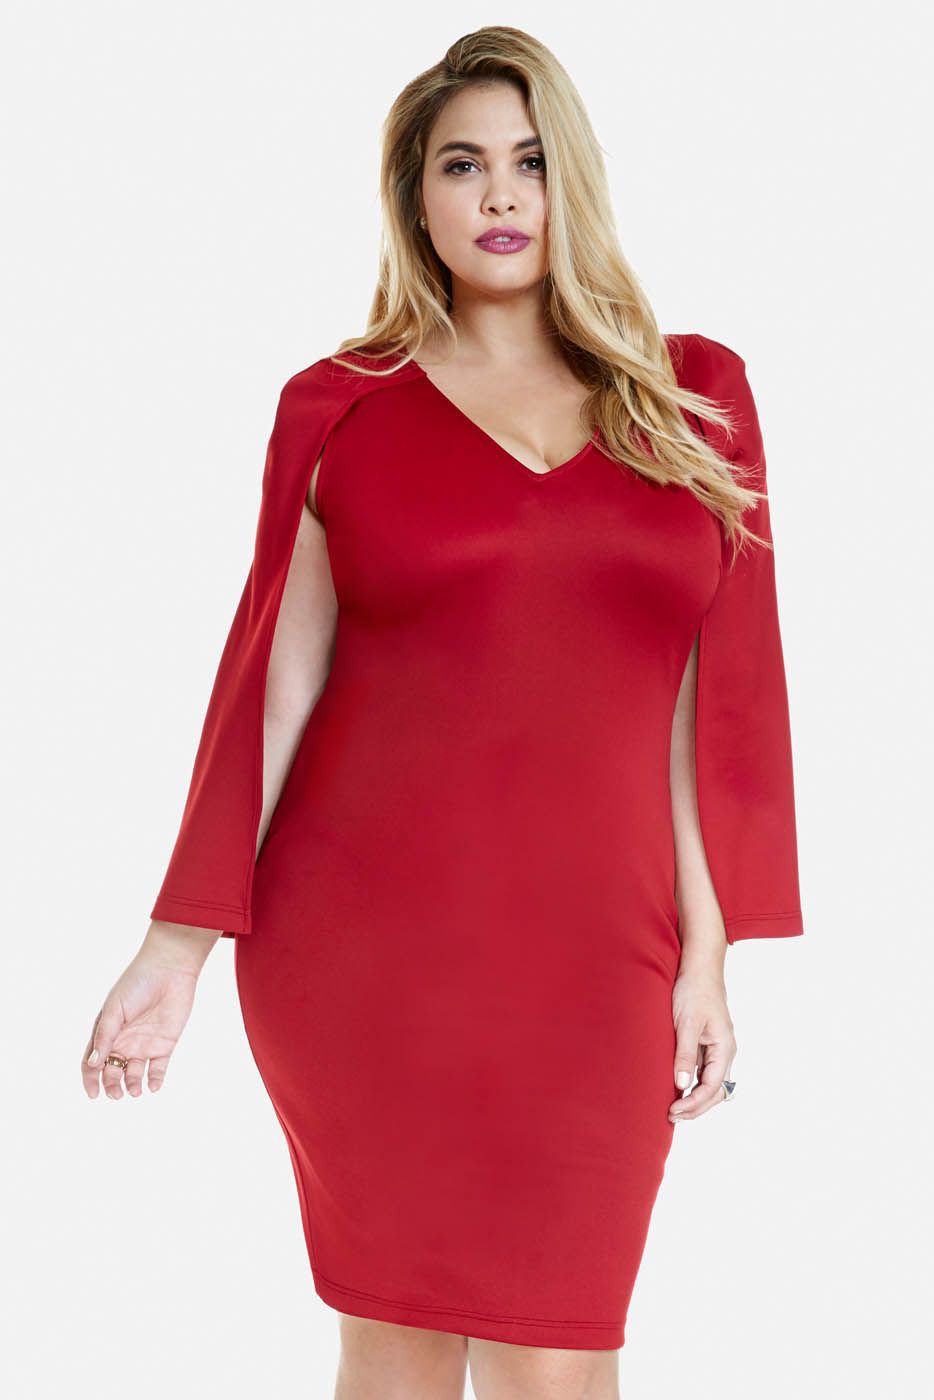 Plus Size Clothing and Fashion for Women Latest Cocktail Outfit For ...